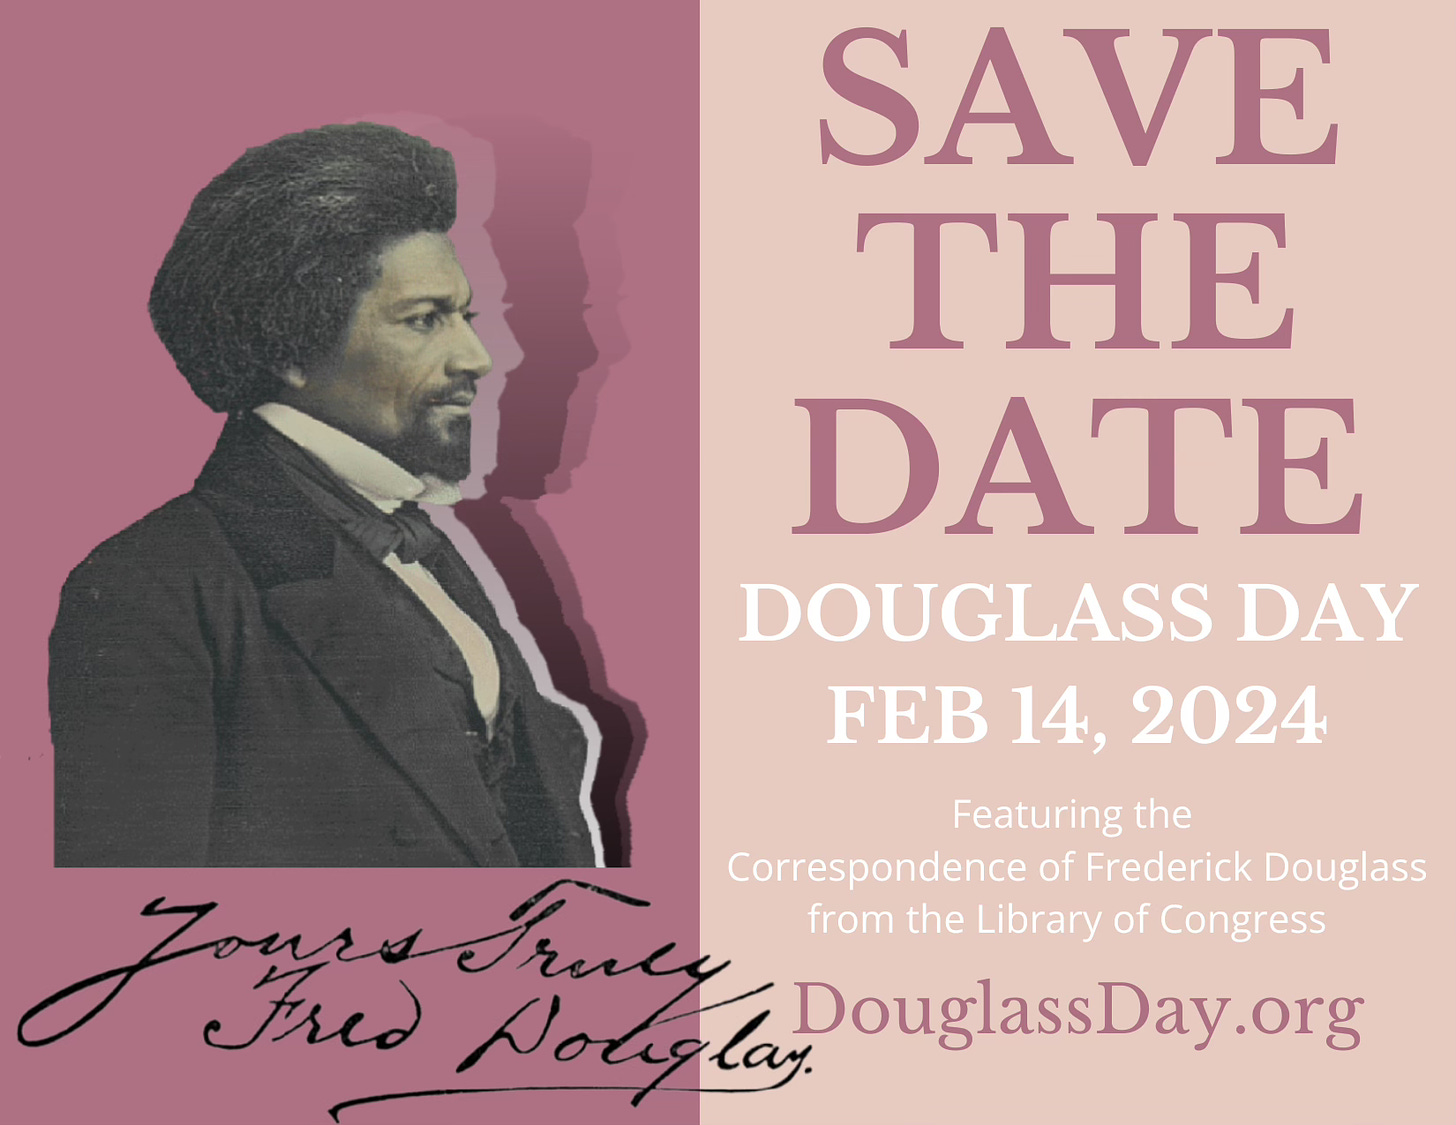 Save the Date for Douglass Day 2024